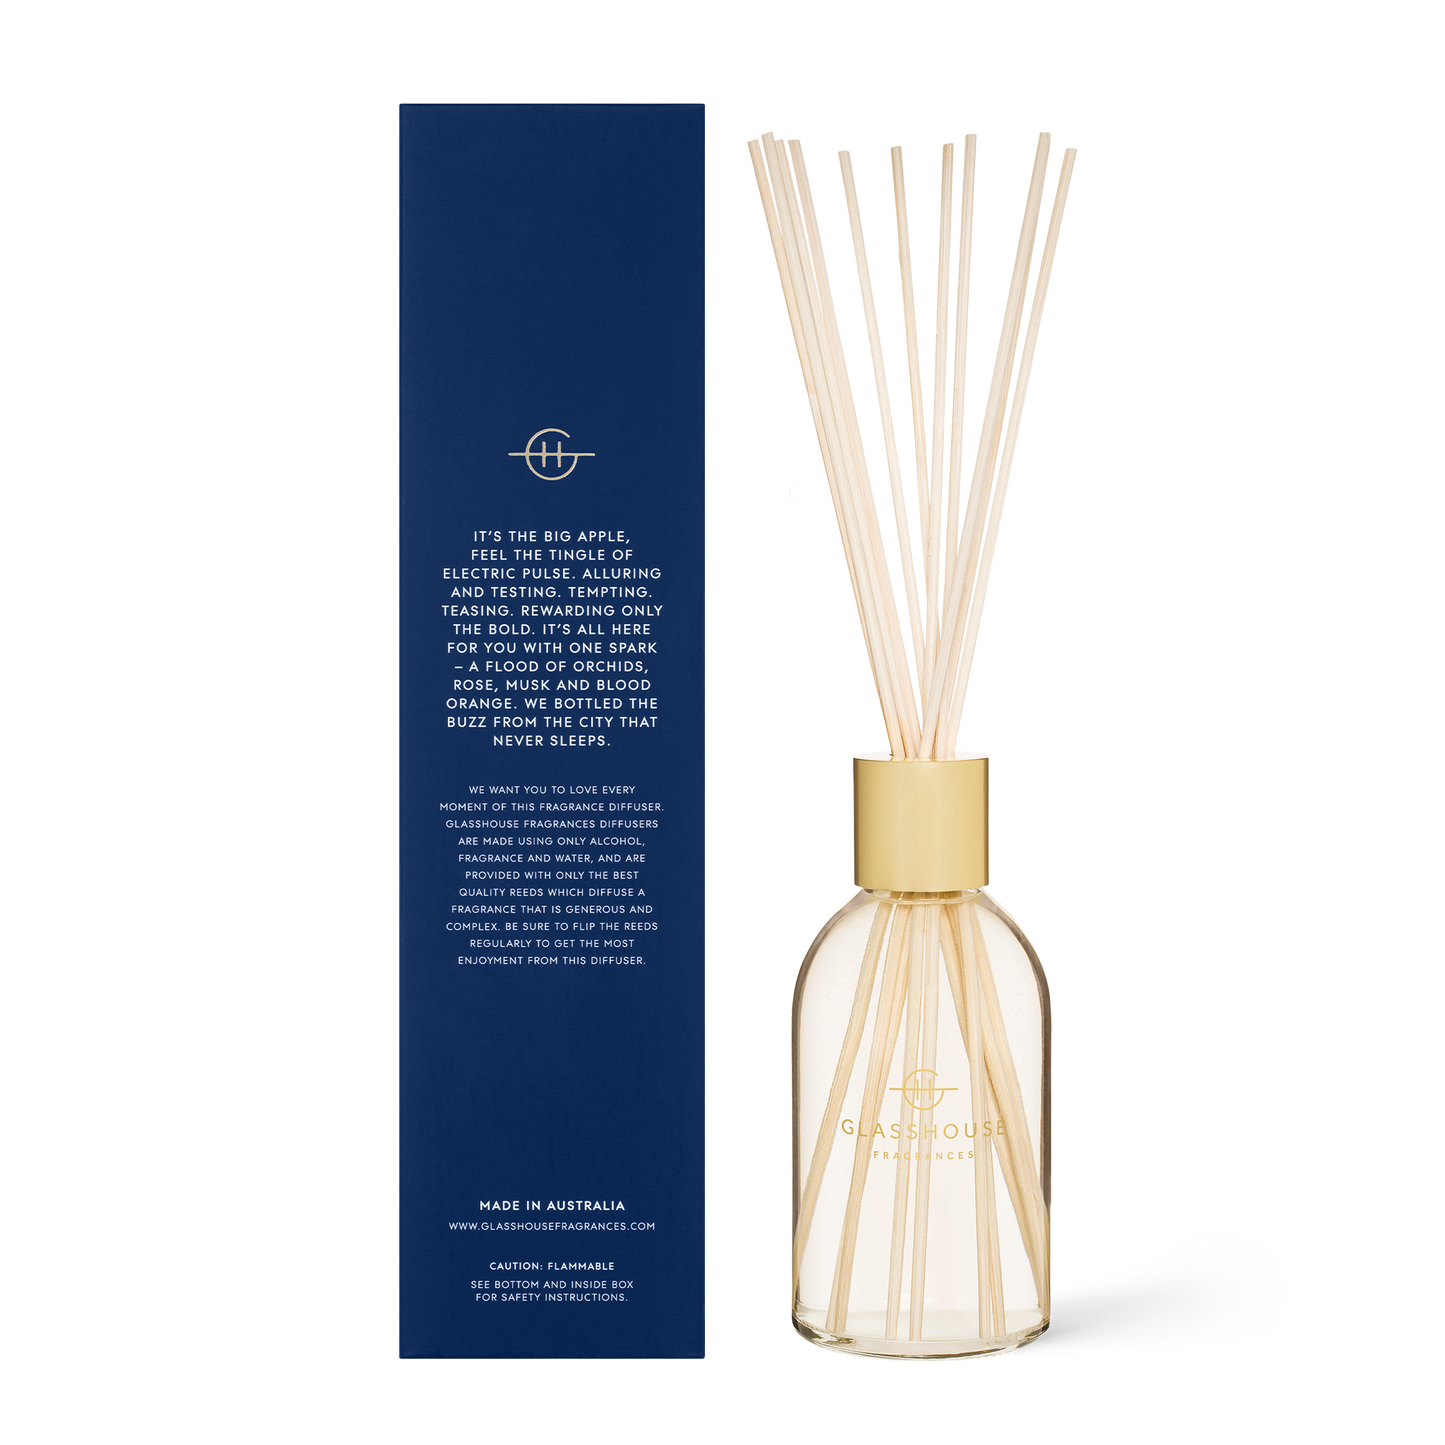 I'll Take Manhattan Diffuser A transcendent everyday luxury, it creates instant ambience. Exotic orchid, bold black rose and amber invoke the electric energy of the Big Apple.